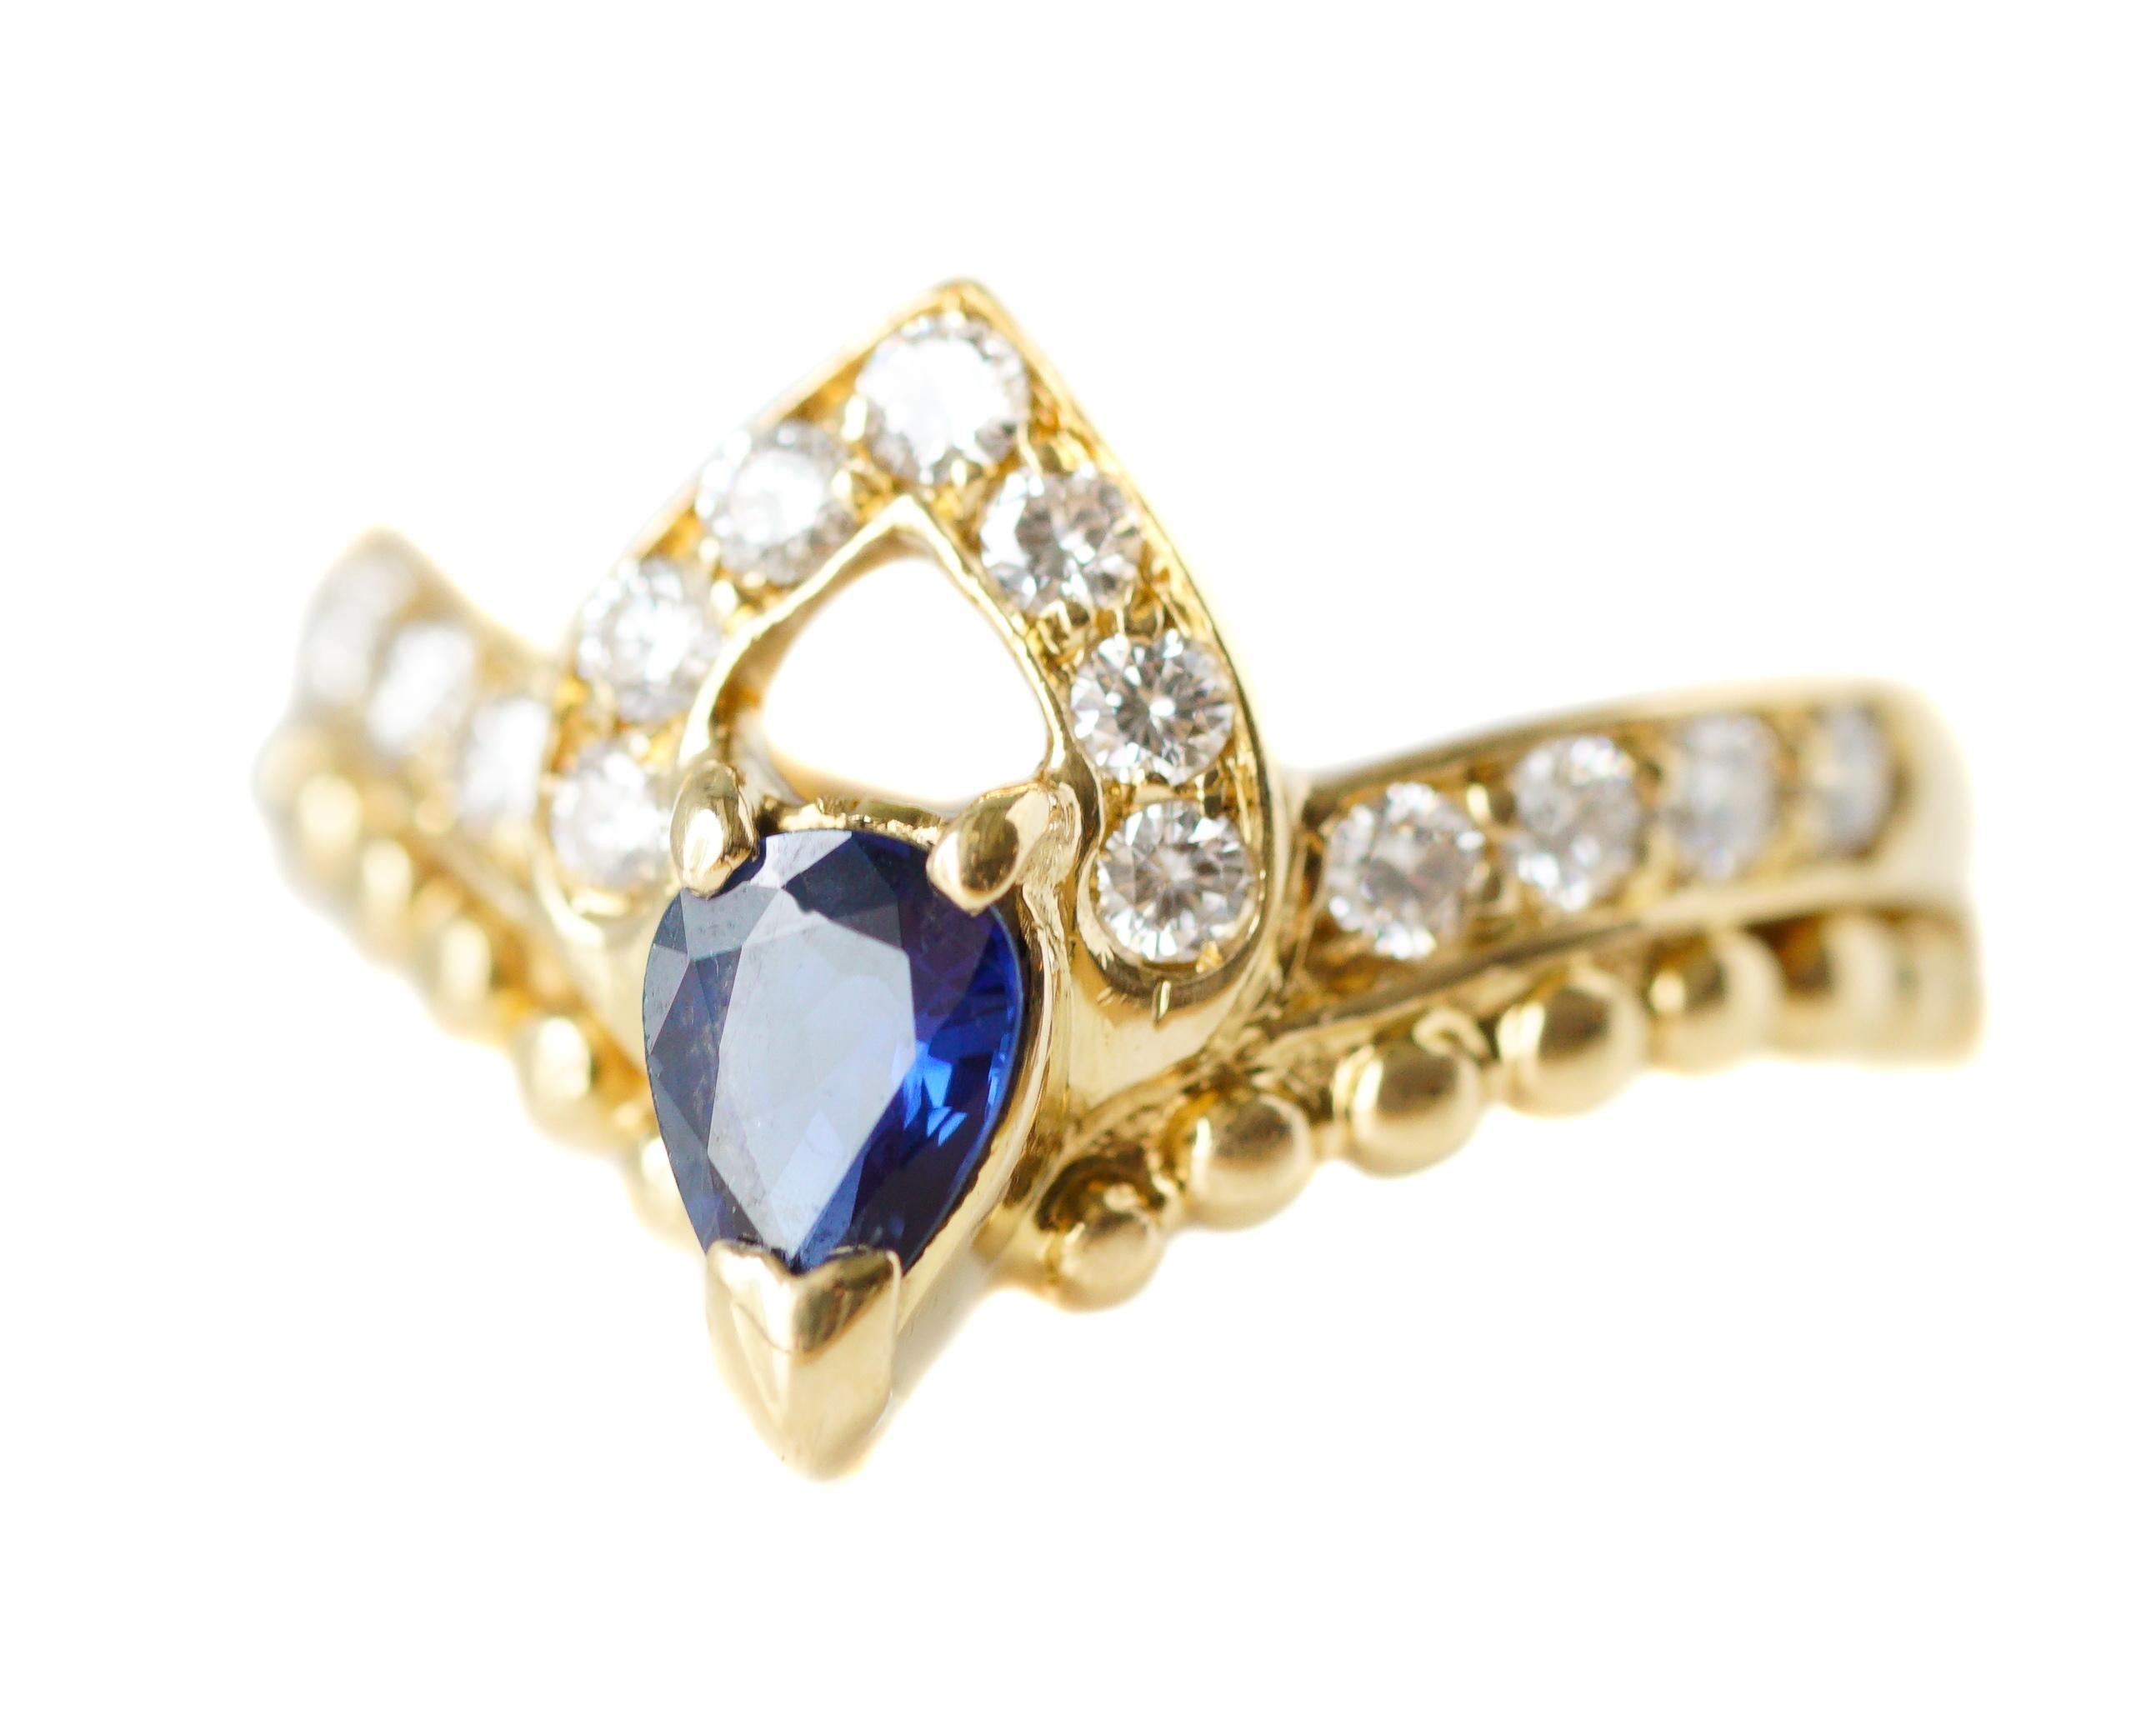 This elegant Vintage ring features a 0.25 carat Pear Cut Blue Sapphire with 0.75 carat total sparkling Round Brilliant Diamonds.

The 18 karat Yellow Gold richly accents the prong set gemstones. A modified Diamond half halo crowns the Blue Sapphire